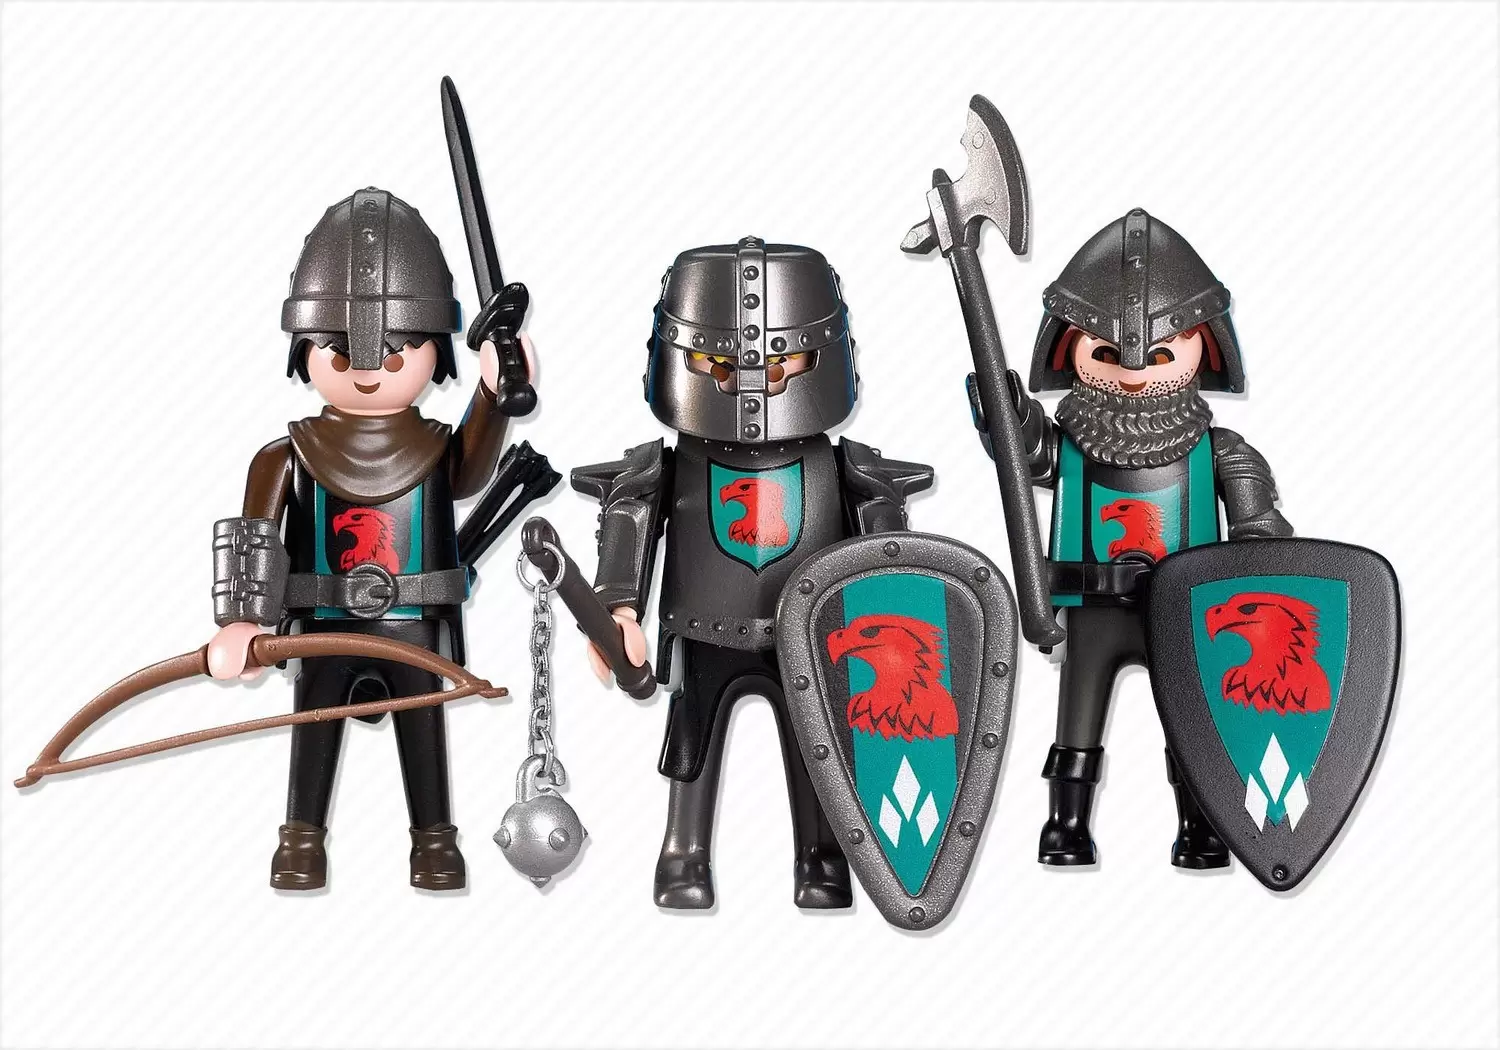 Château faucon playmobil - Playmobil | Beebs